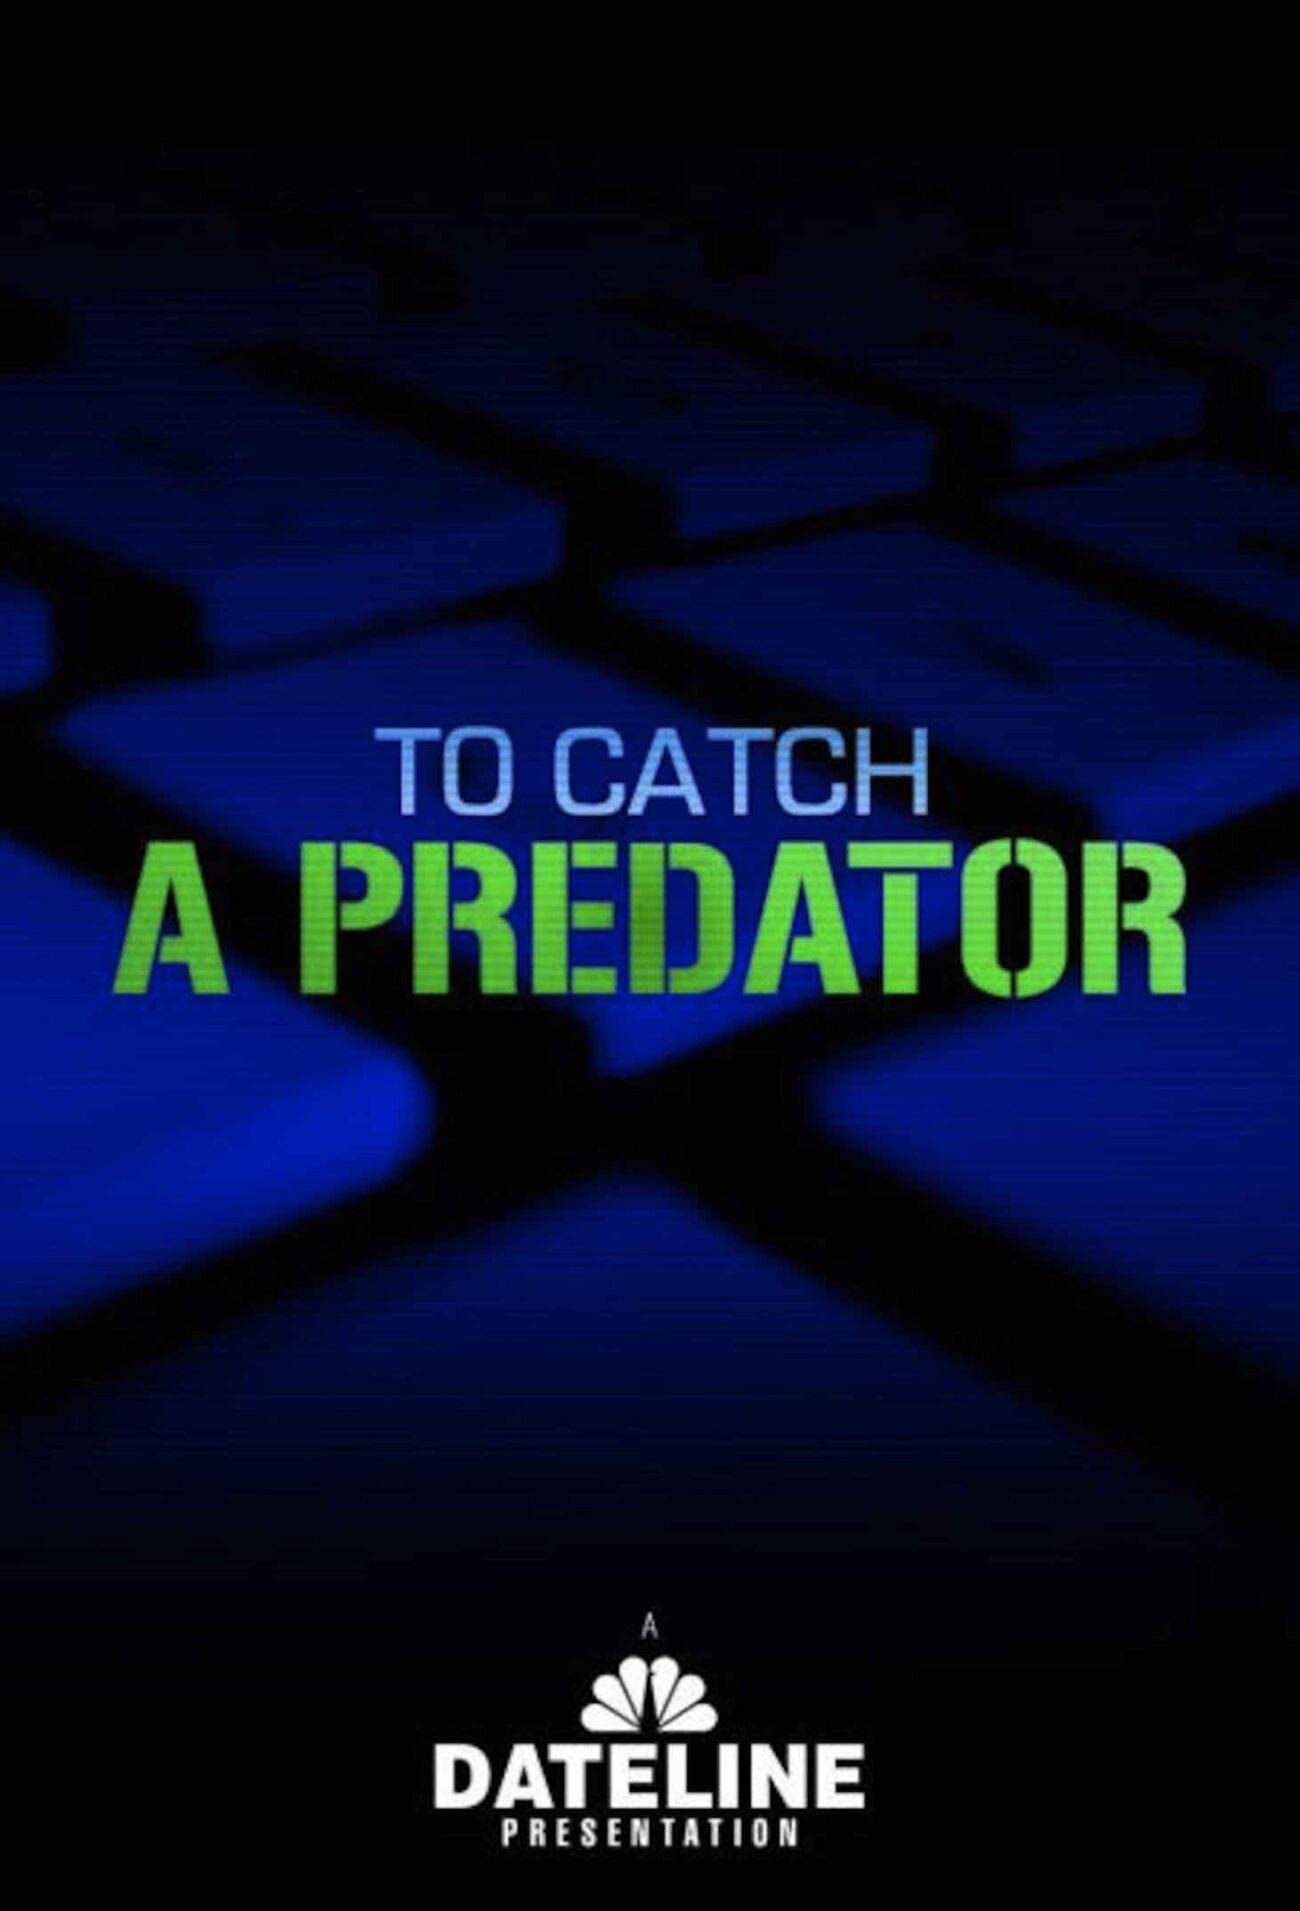 There were few more riveting true-crime TV shows than the reality series 'To Catch a Predator' on 'Dateline'. Here's what we know about the tragic suicide.